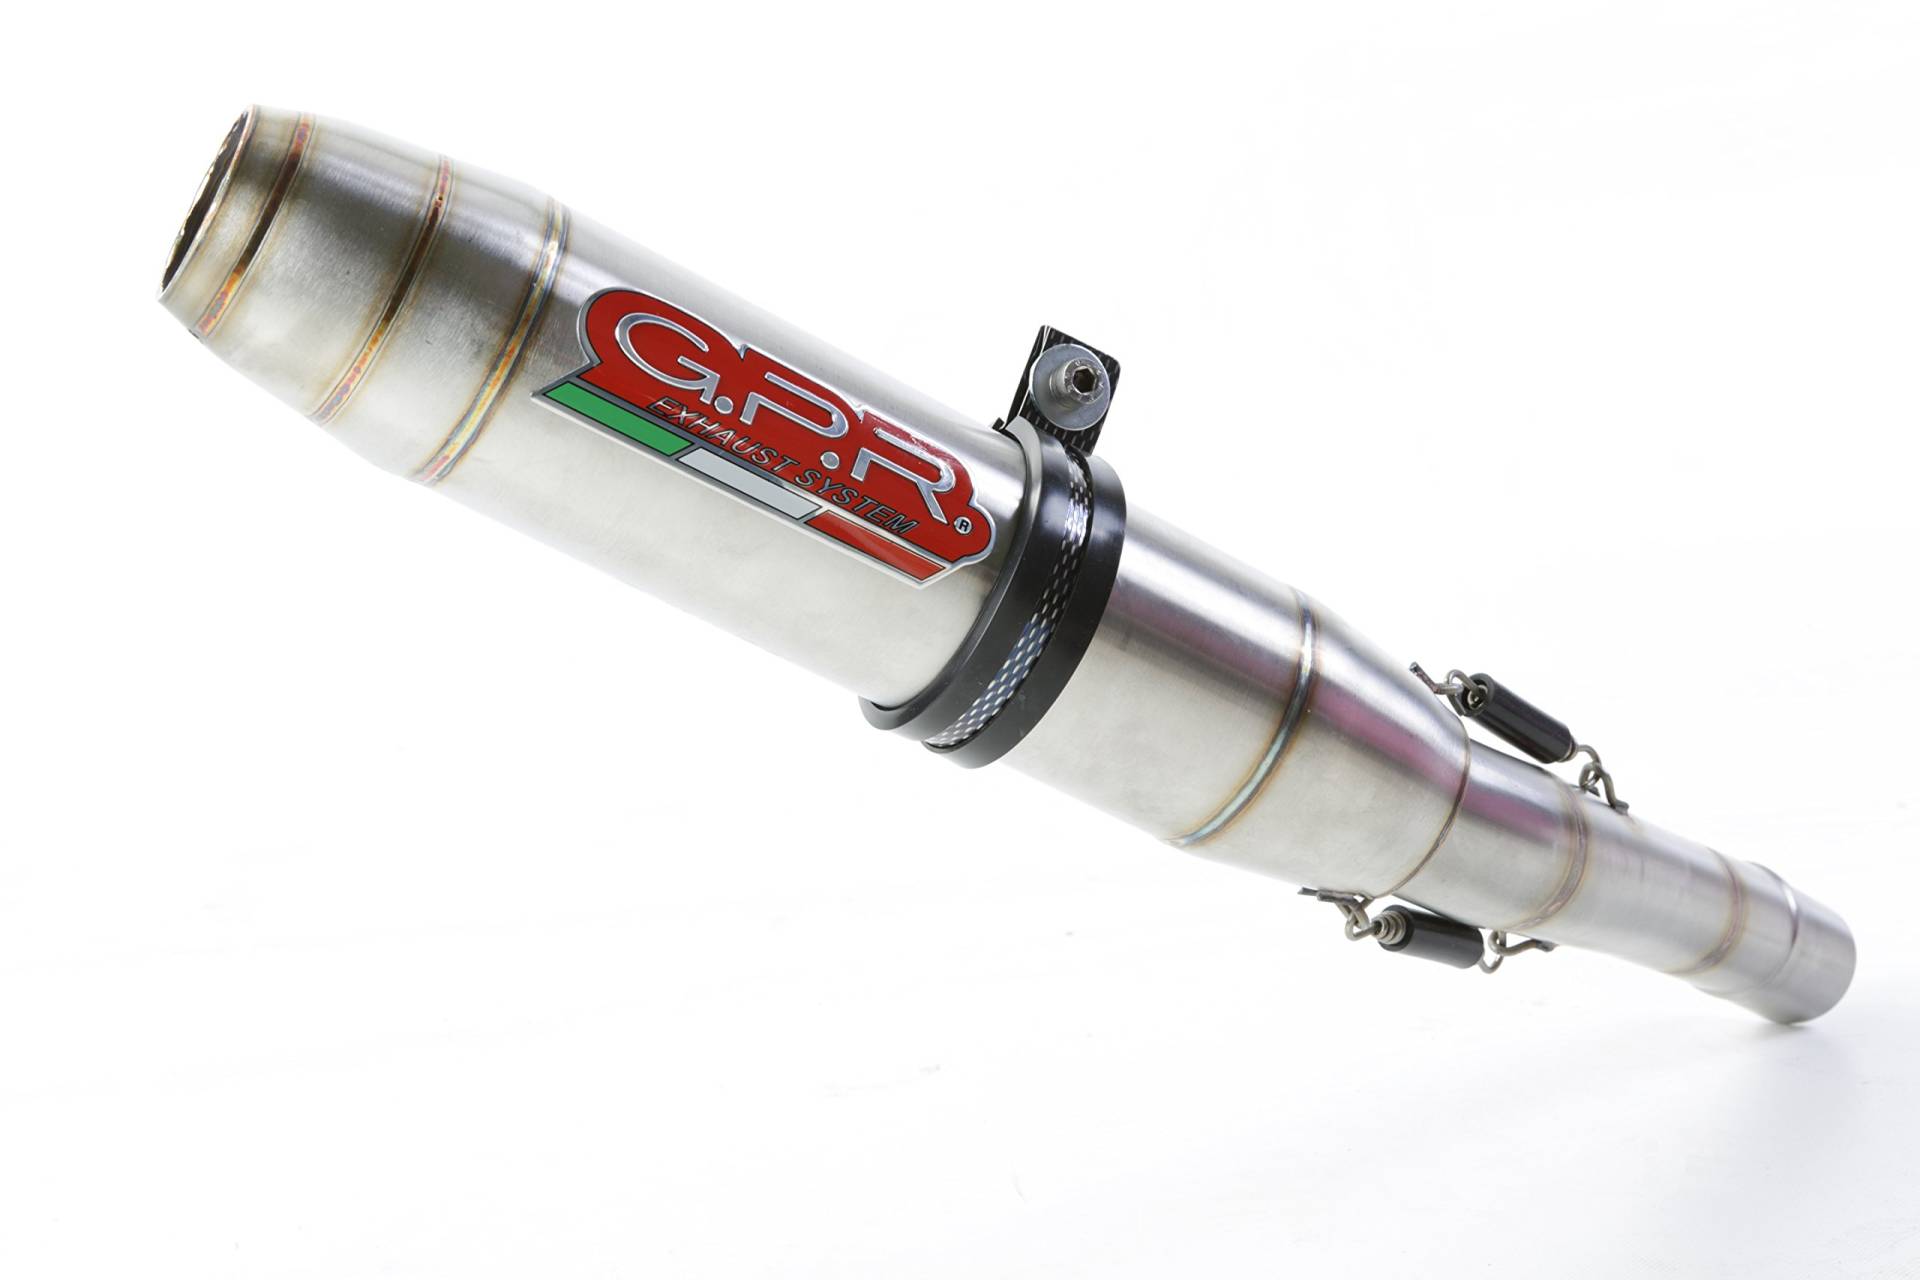 GPR Auspuff Endkappe – Yamaha MT-09/fz-09 2014/15 HOMOLOGATED Full Exhaust System with Catalyst by GPR Exhaust Systems Deeptone Edelstahl Line von GPR EXHAUST SYSTEM